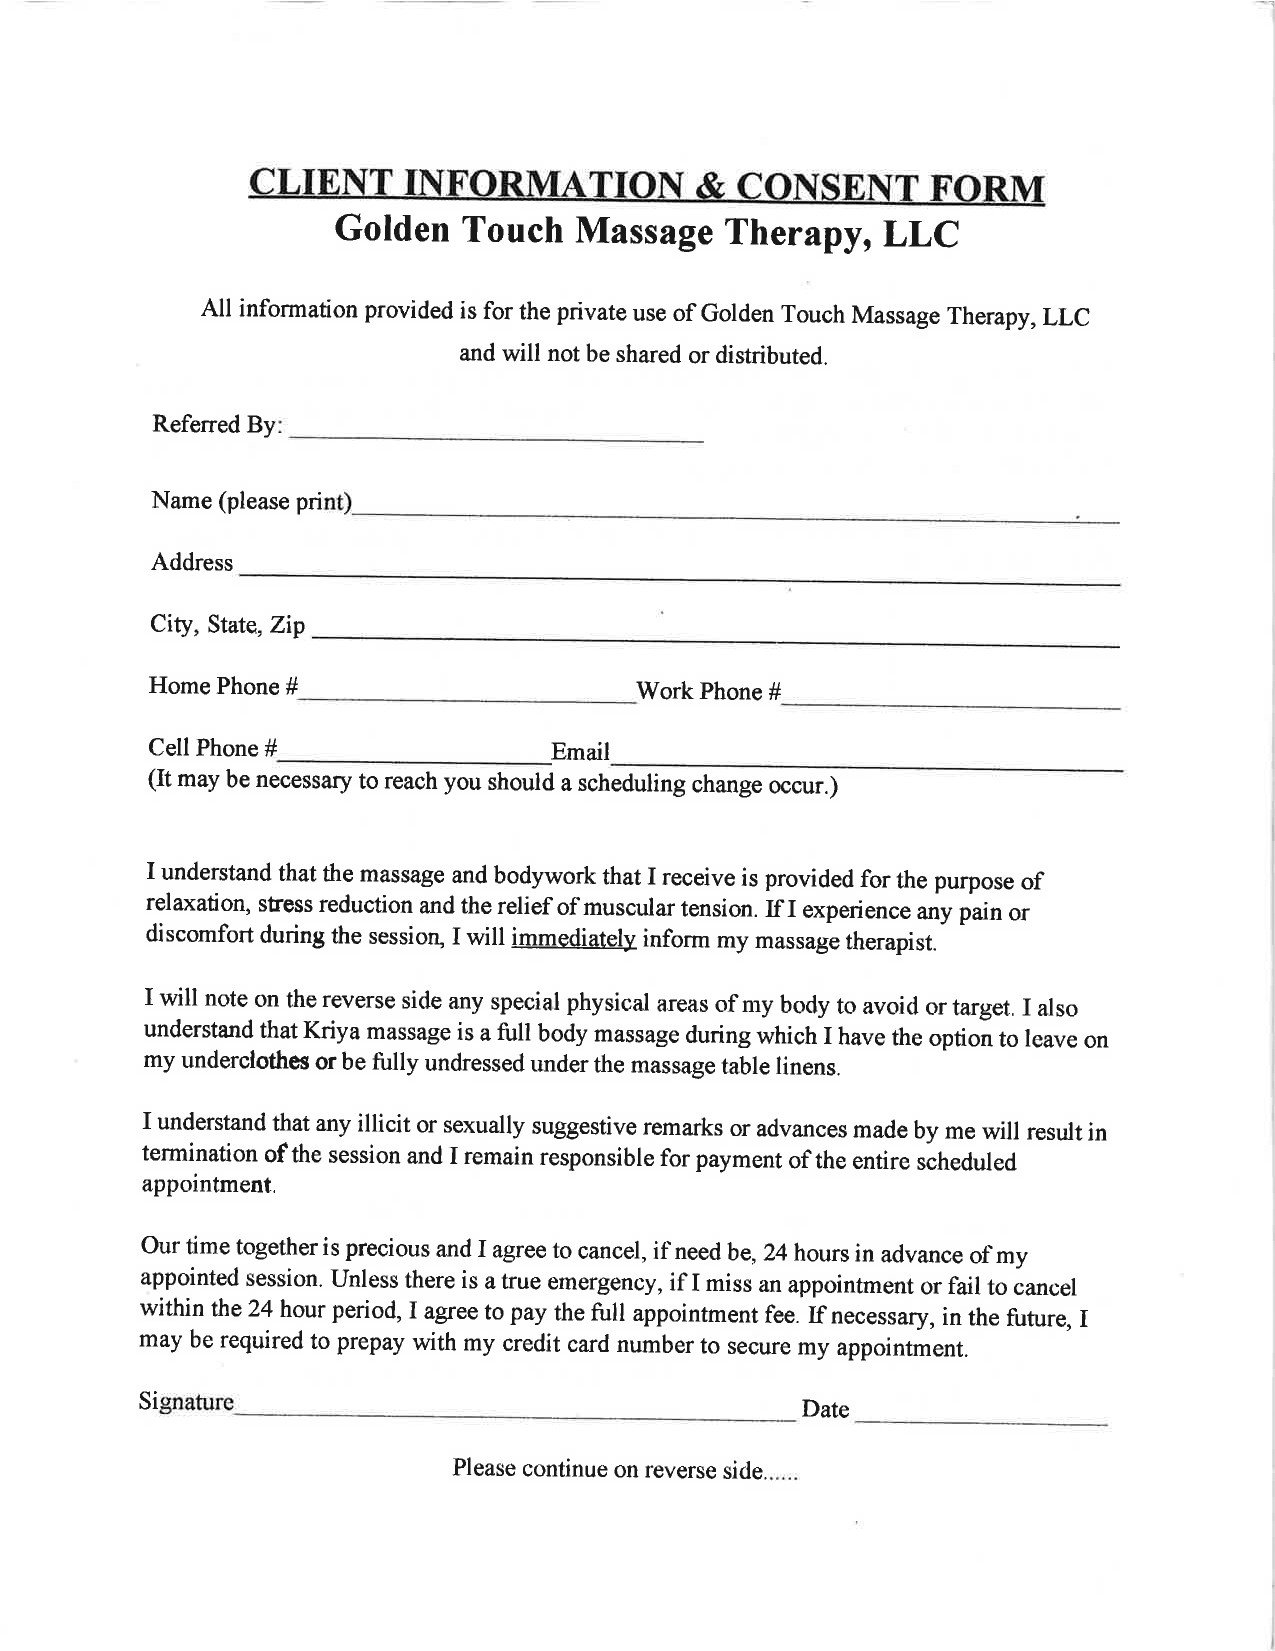 Golden Touch Massage Therapy Client Intake Form